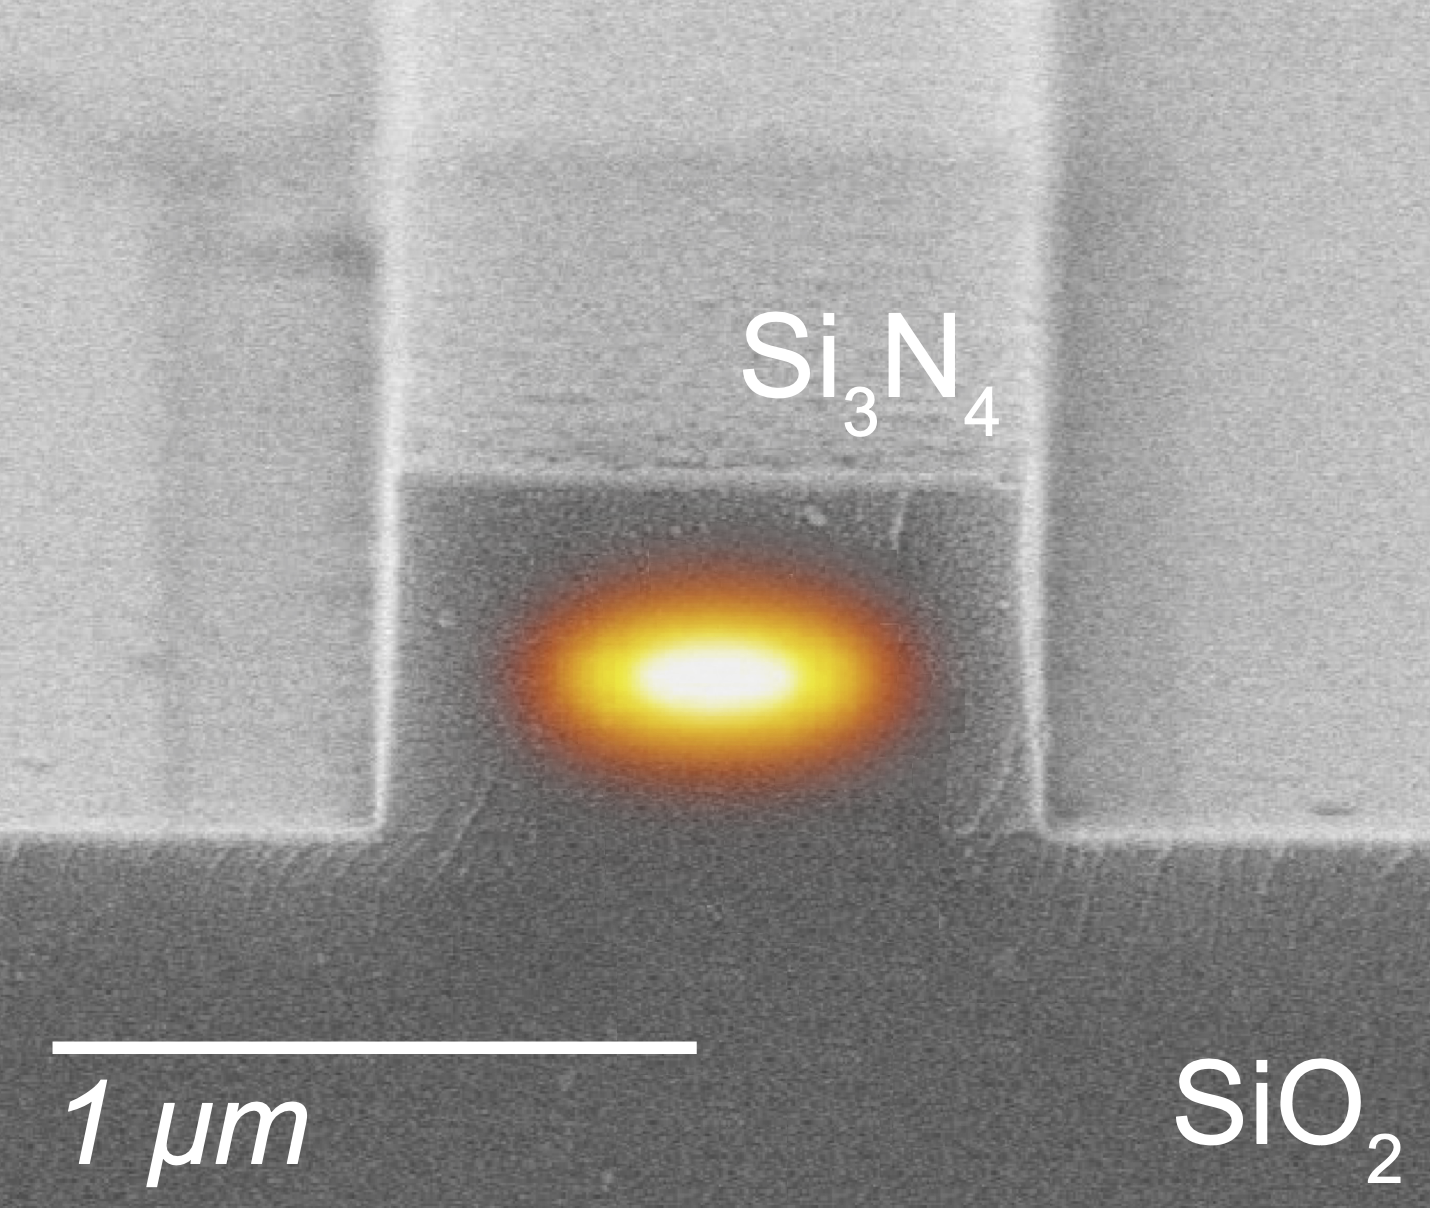 Figure showing an SEM image of a nanofabricated SiN waveguide